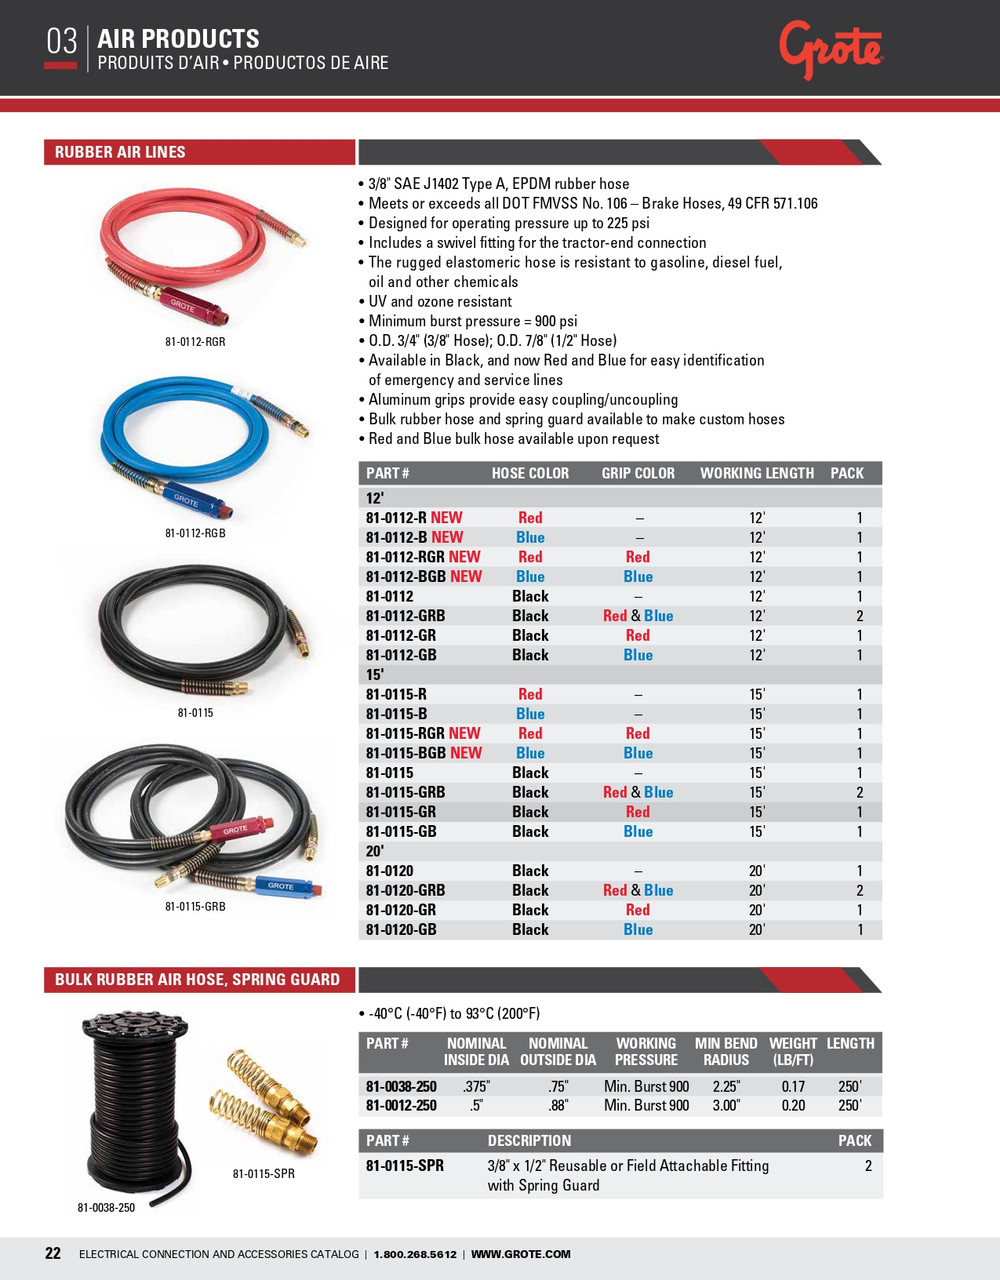 1/2" x 12' Black EPDM Air Hose w/Red & Blue Anodized Grips & Male NPT Fittings  81-0112-GRB